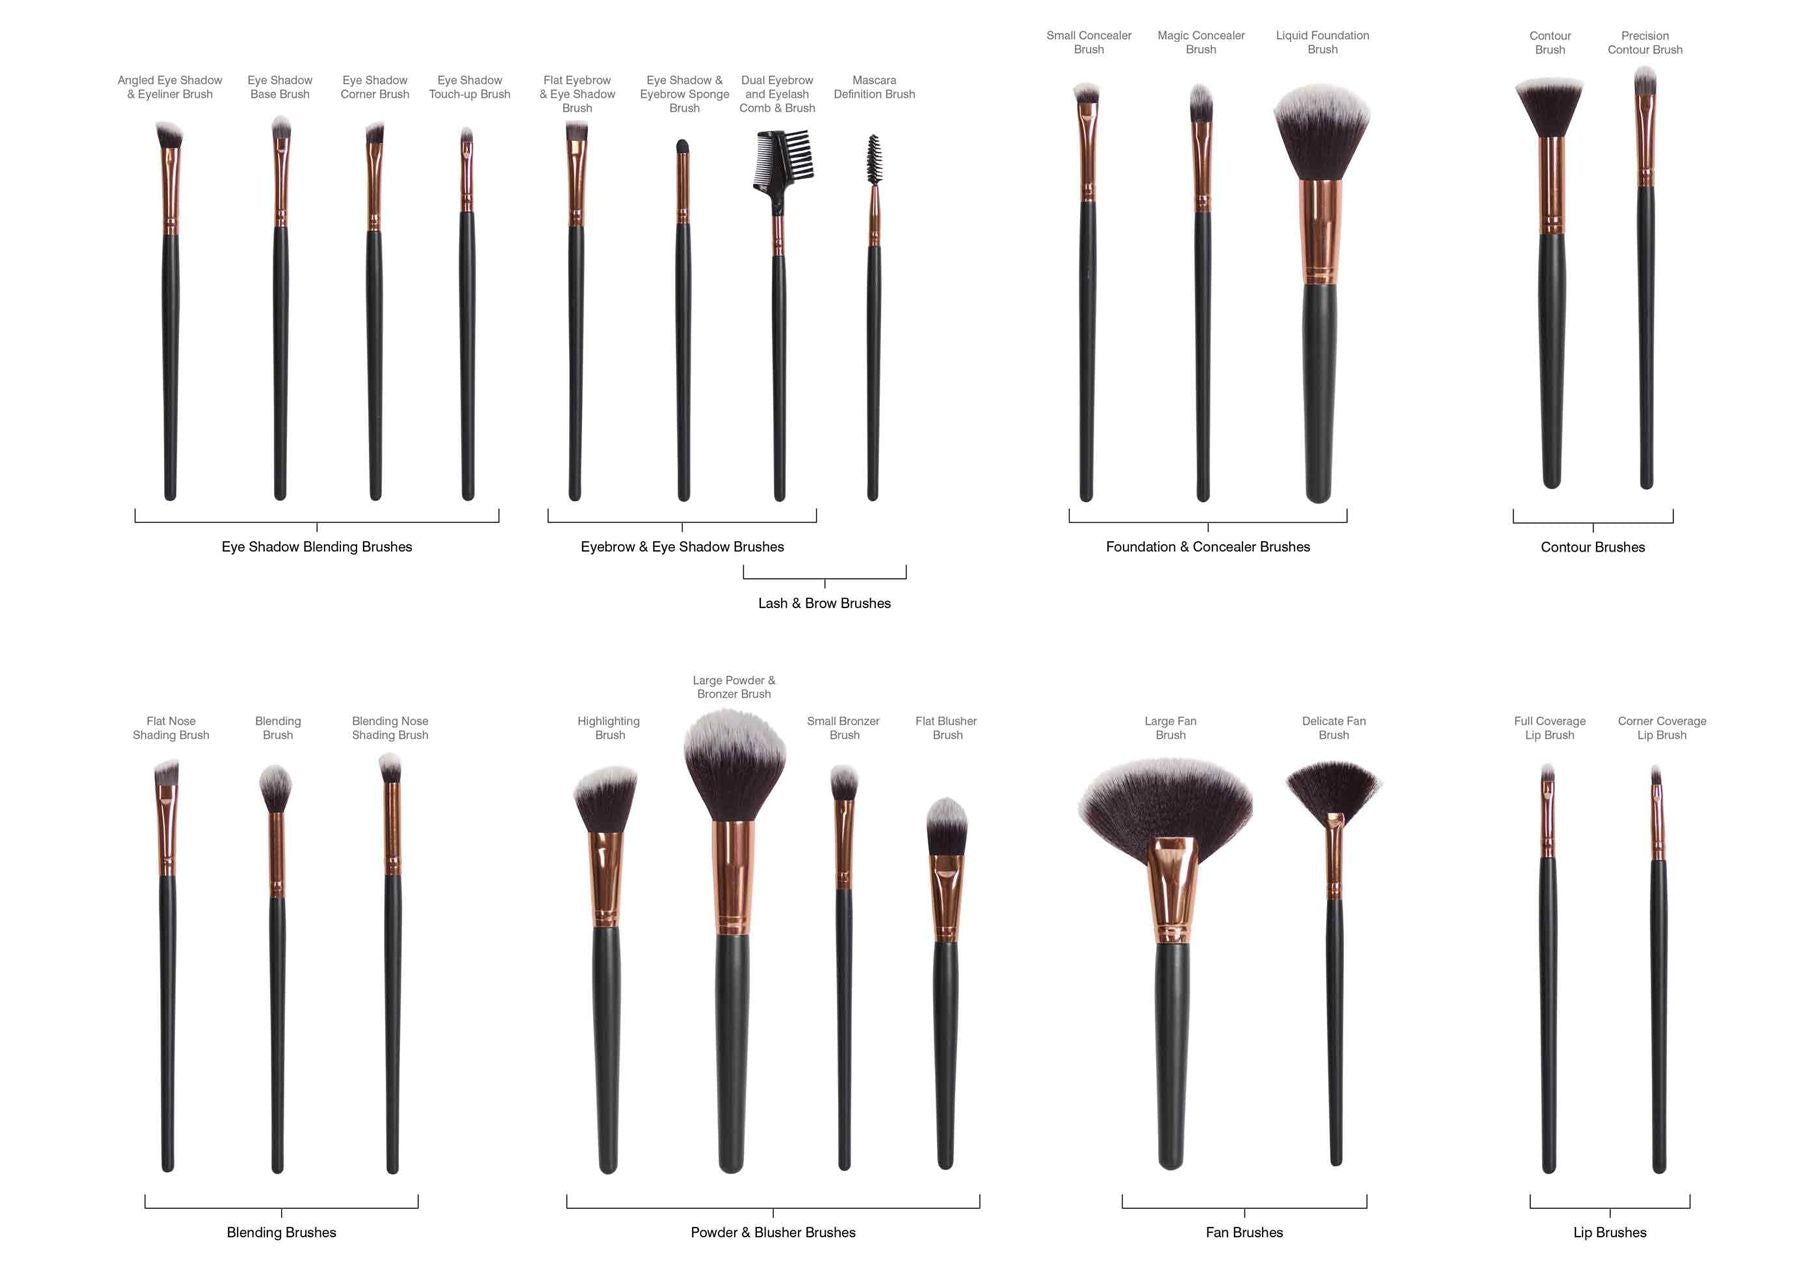 brushes laid out in different categories labelled with individual brush names